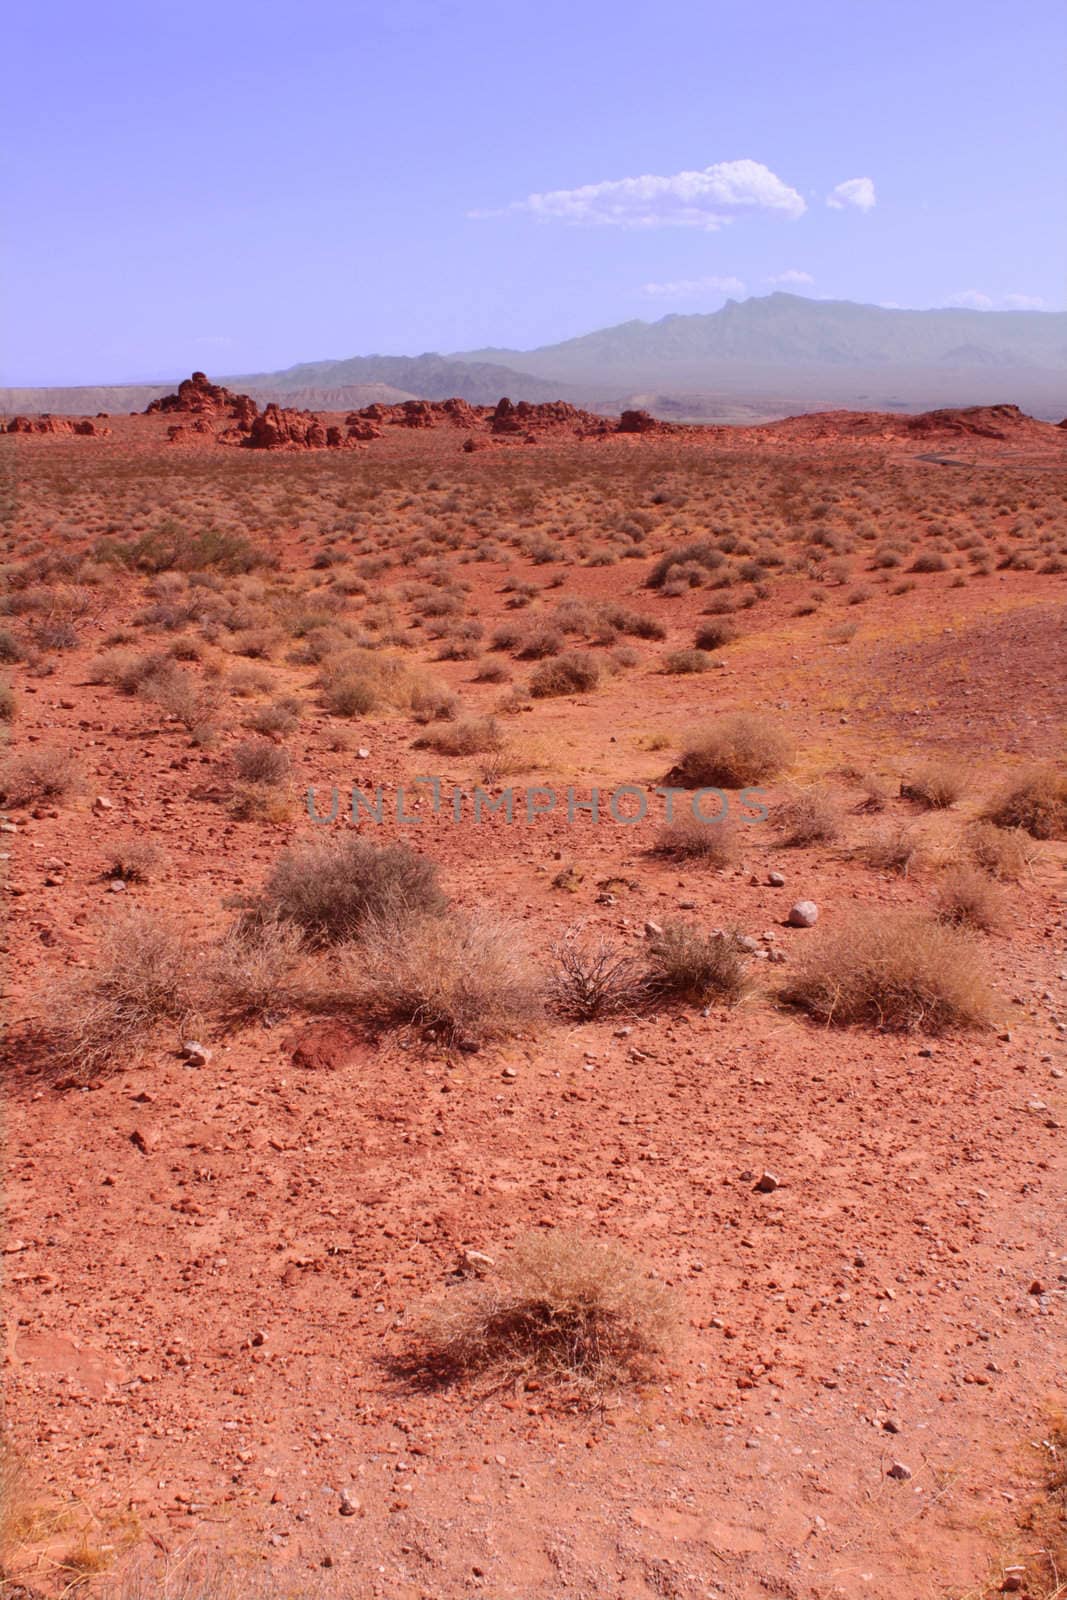 The vast red desert at Valley of Fire State Park in Nevada.